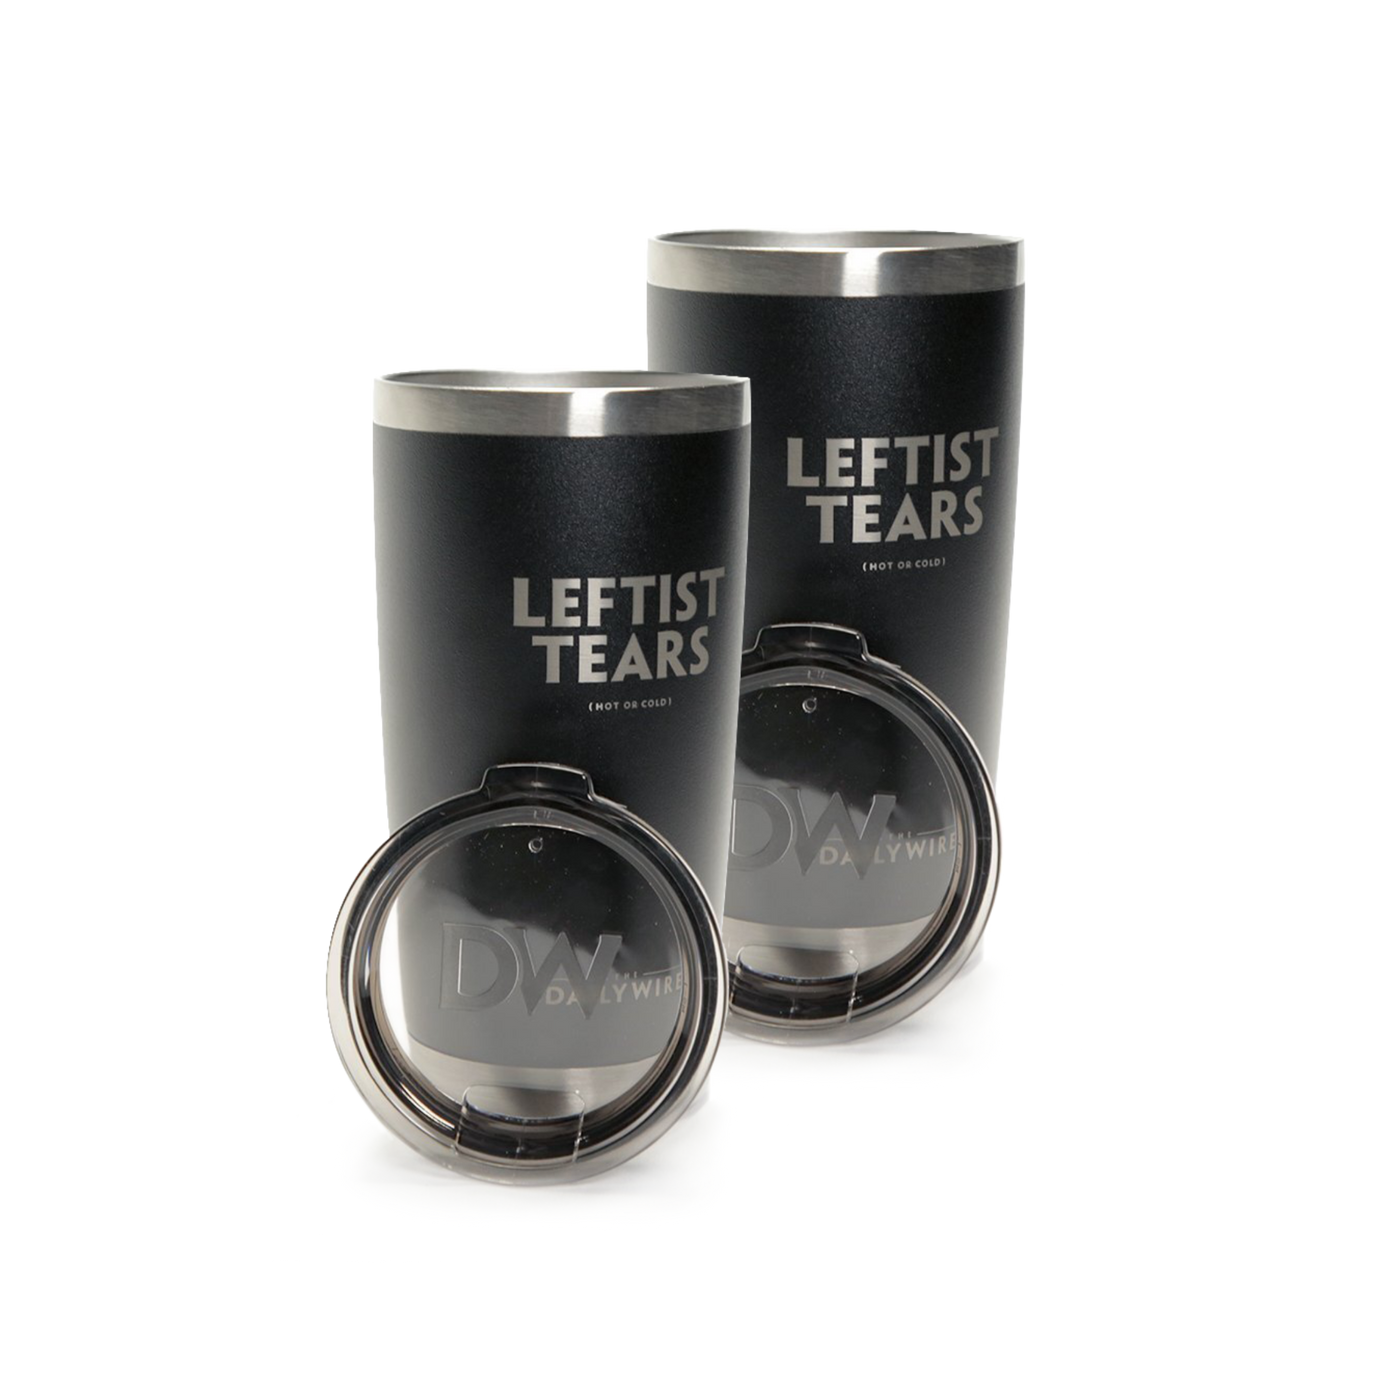 2 Leftist Tears Tumblers - FREE with All Access Membership